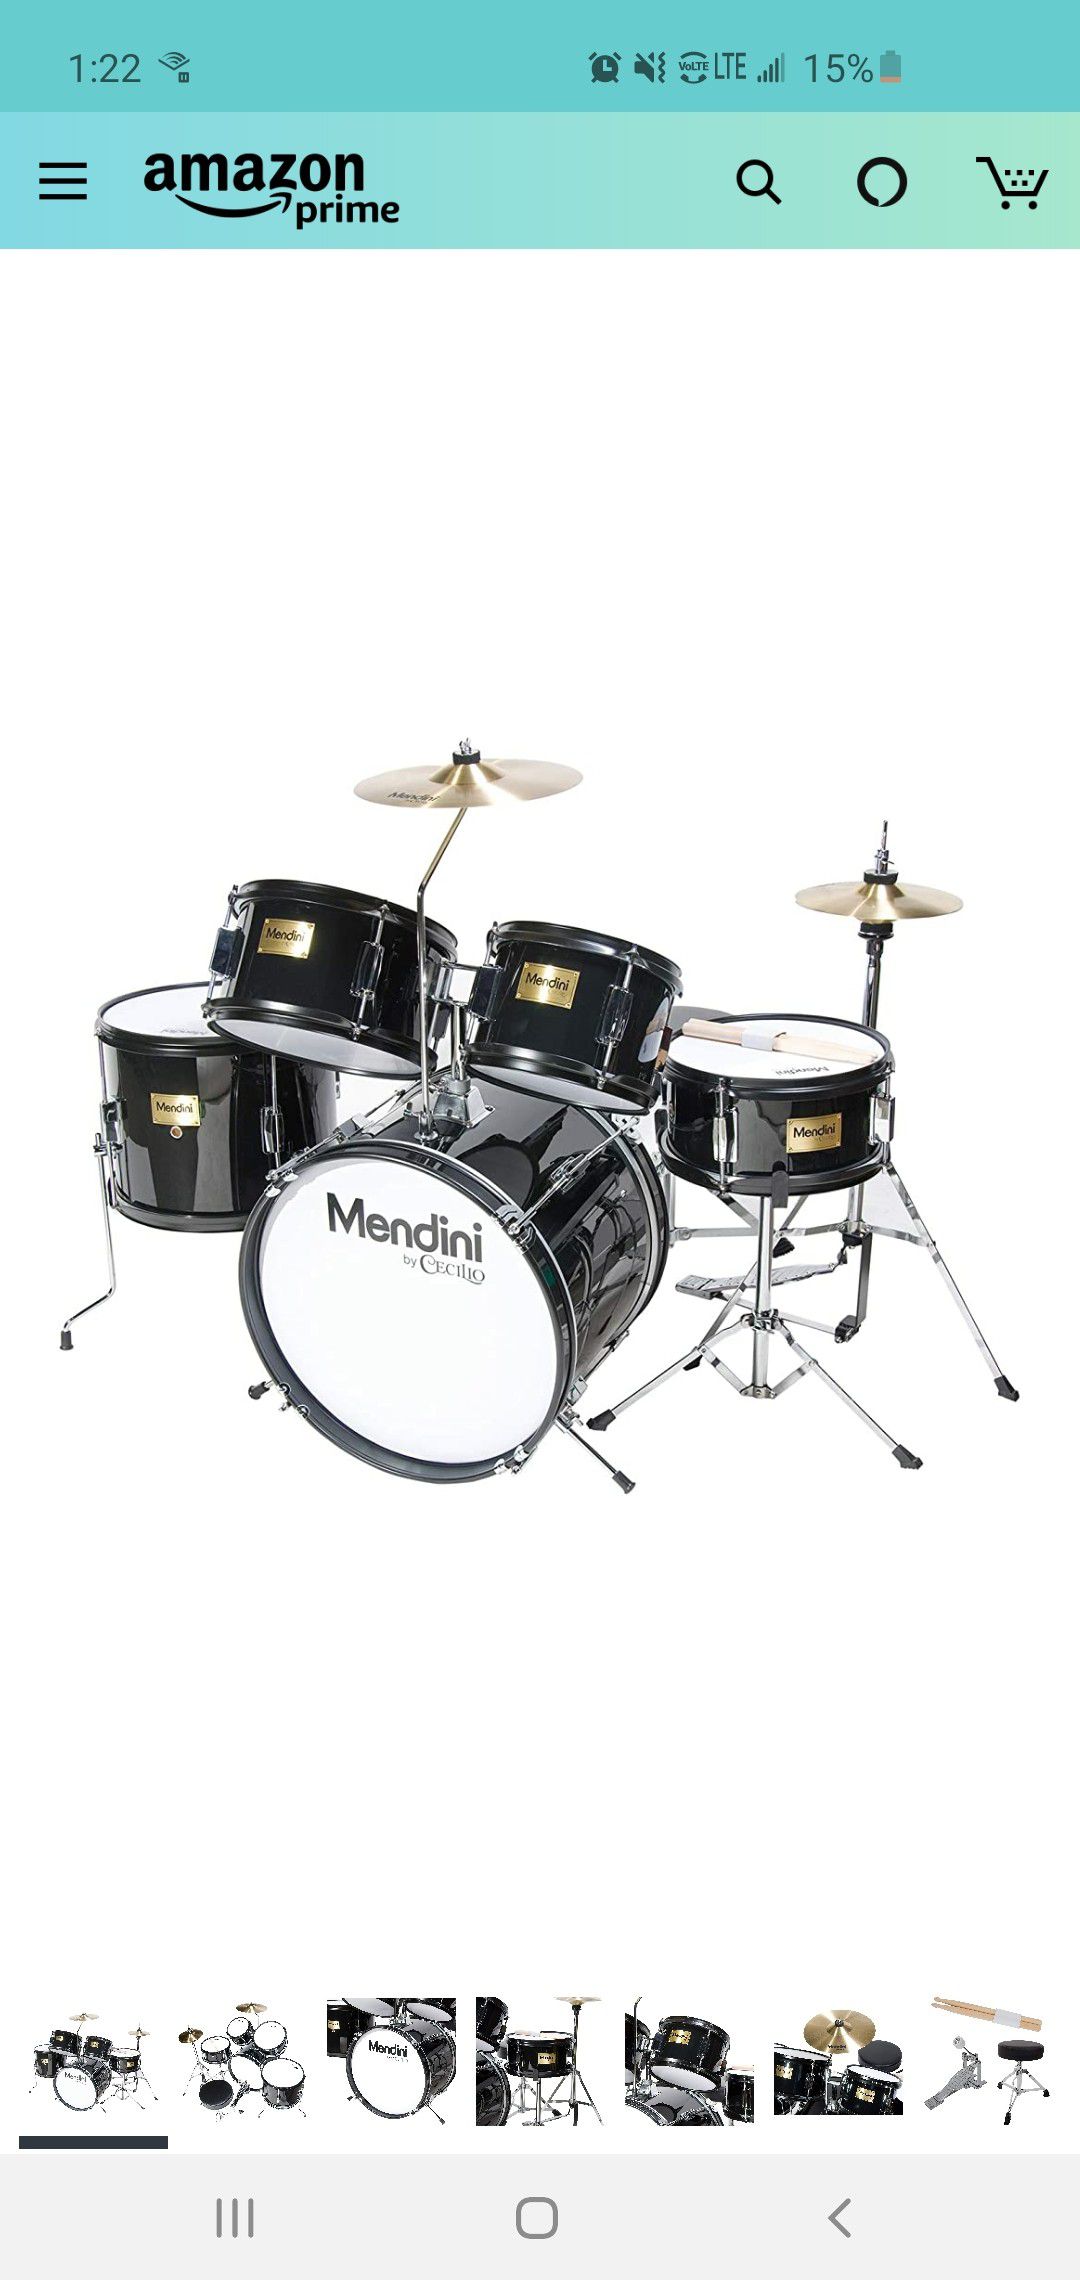 Mendini by Cecilio 16 inch 5-Piece Complete Kids/Junior Drum Set with Adjustable Throne, Cymbal, Pedal & Drumsticks, Metallic Black, MJDS-5-BK